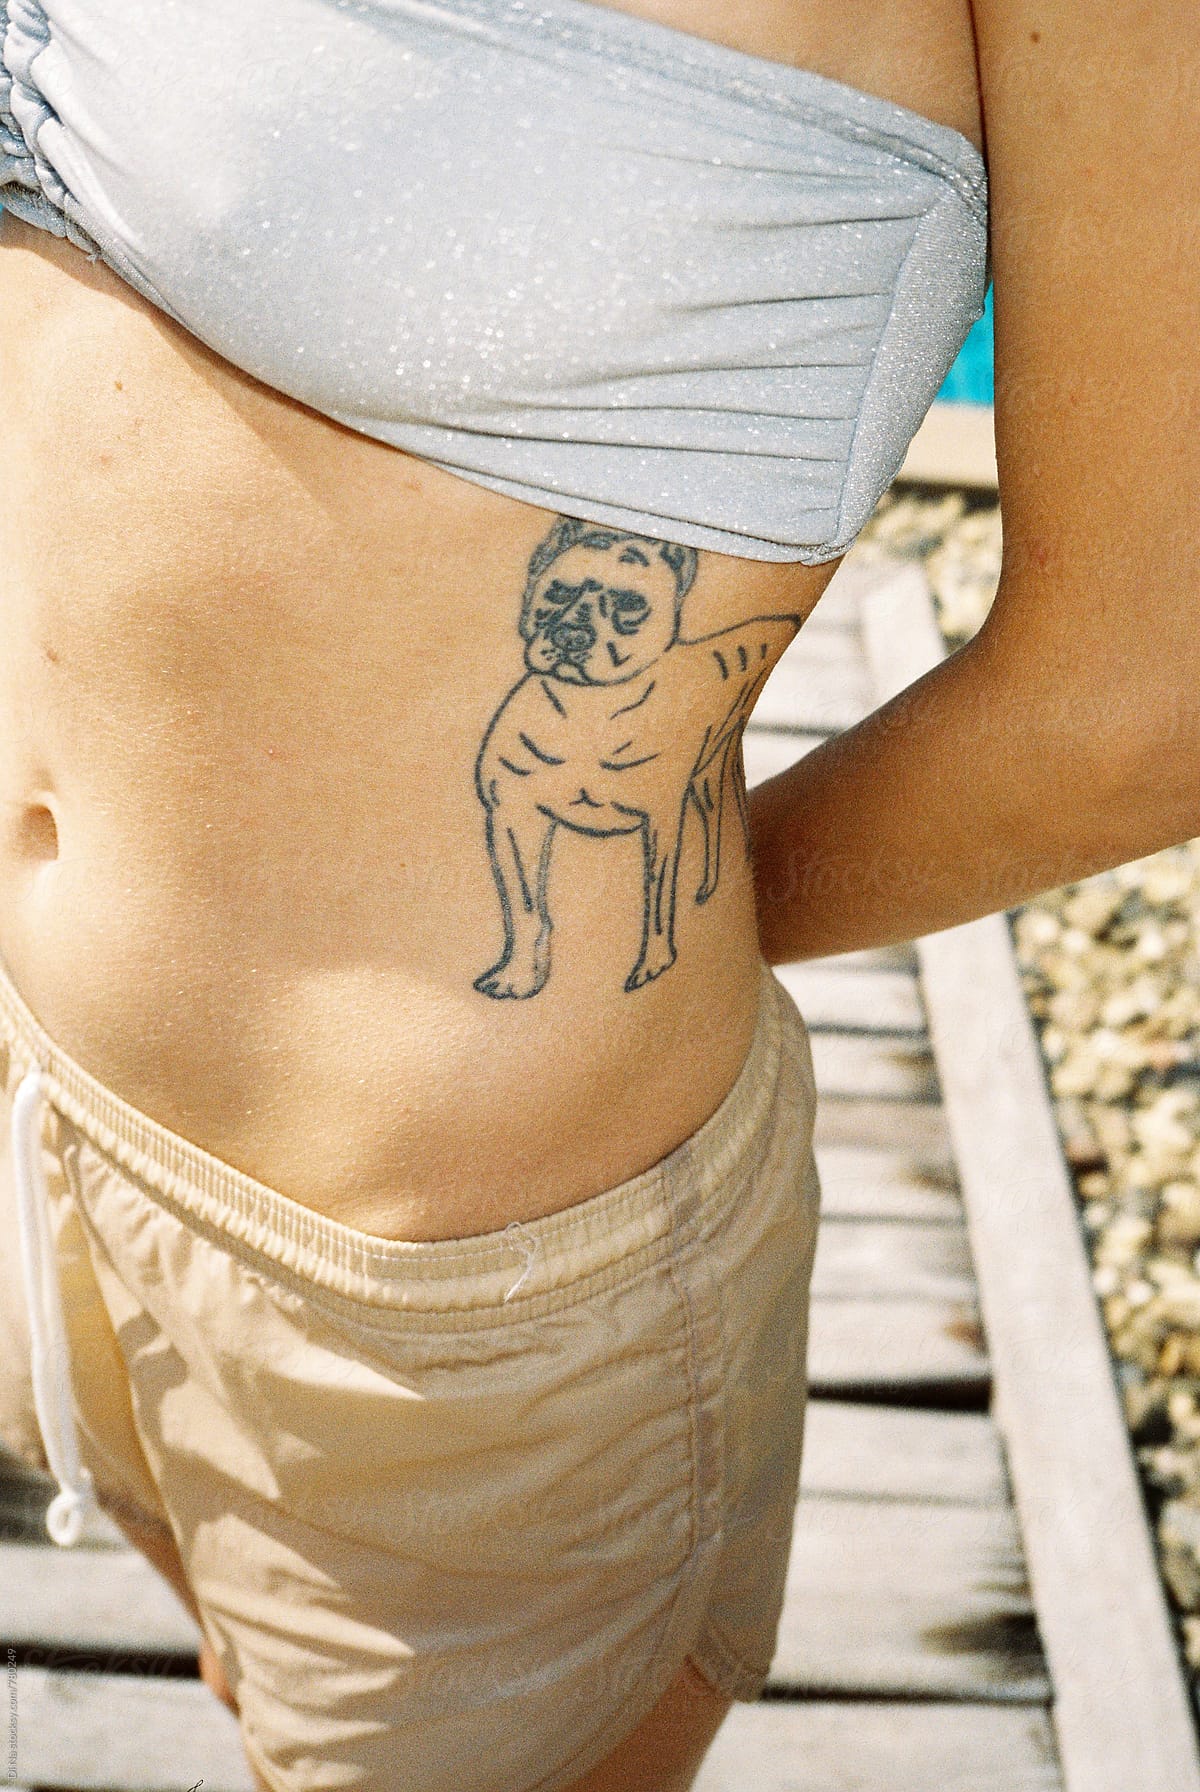 Young girl with a dog tattoo on her body